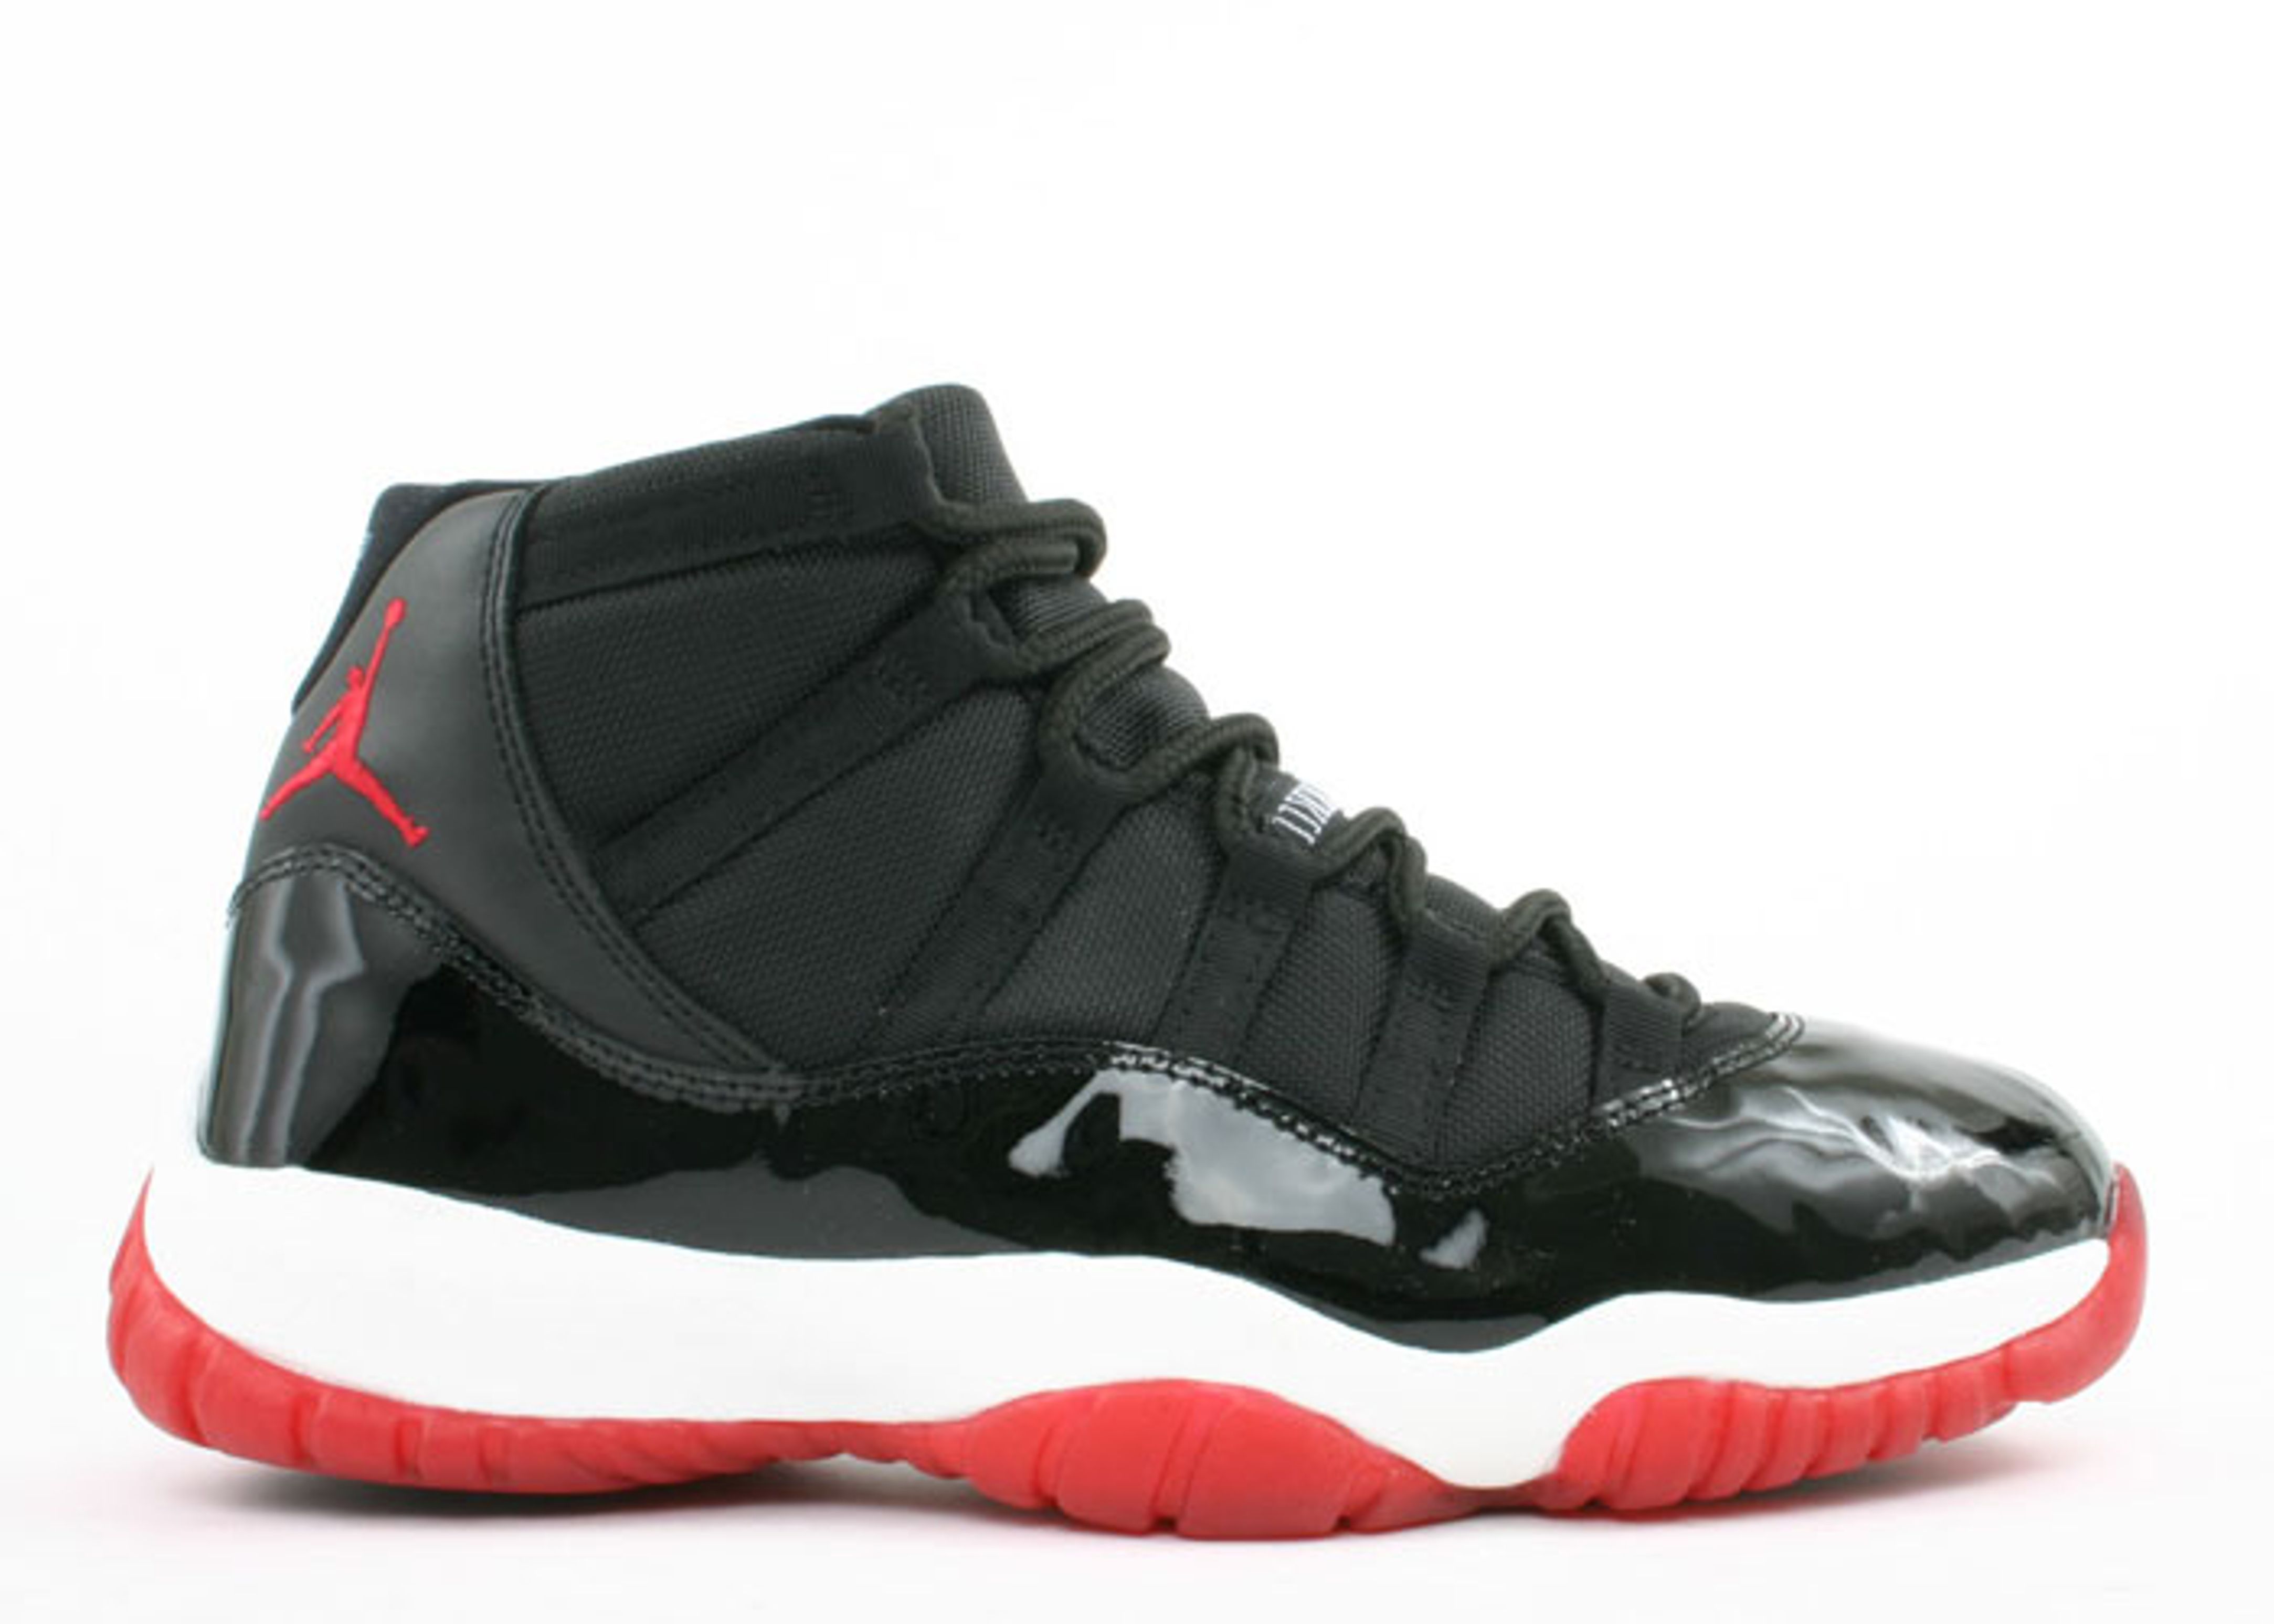 retro 11s black and red